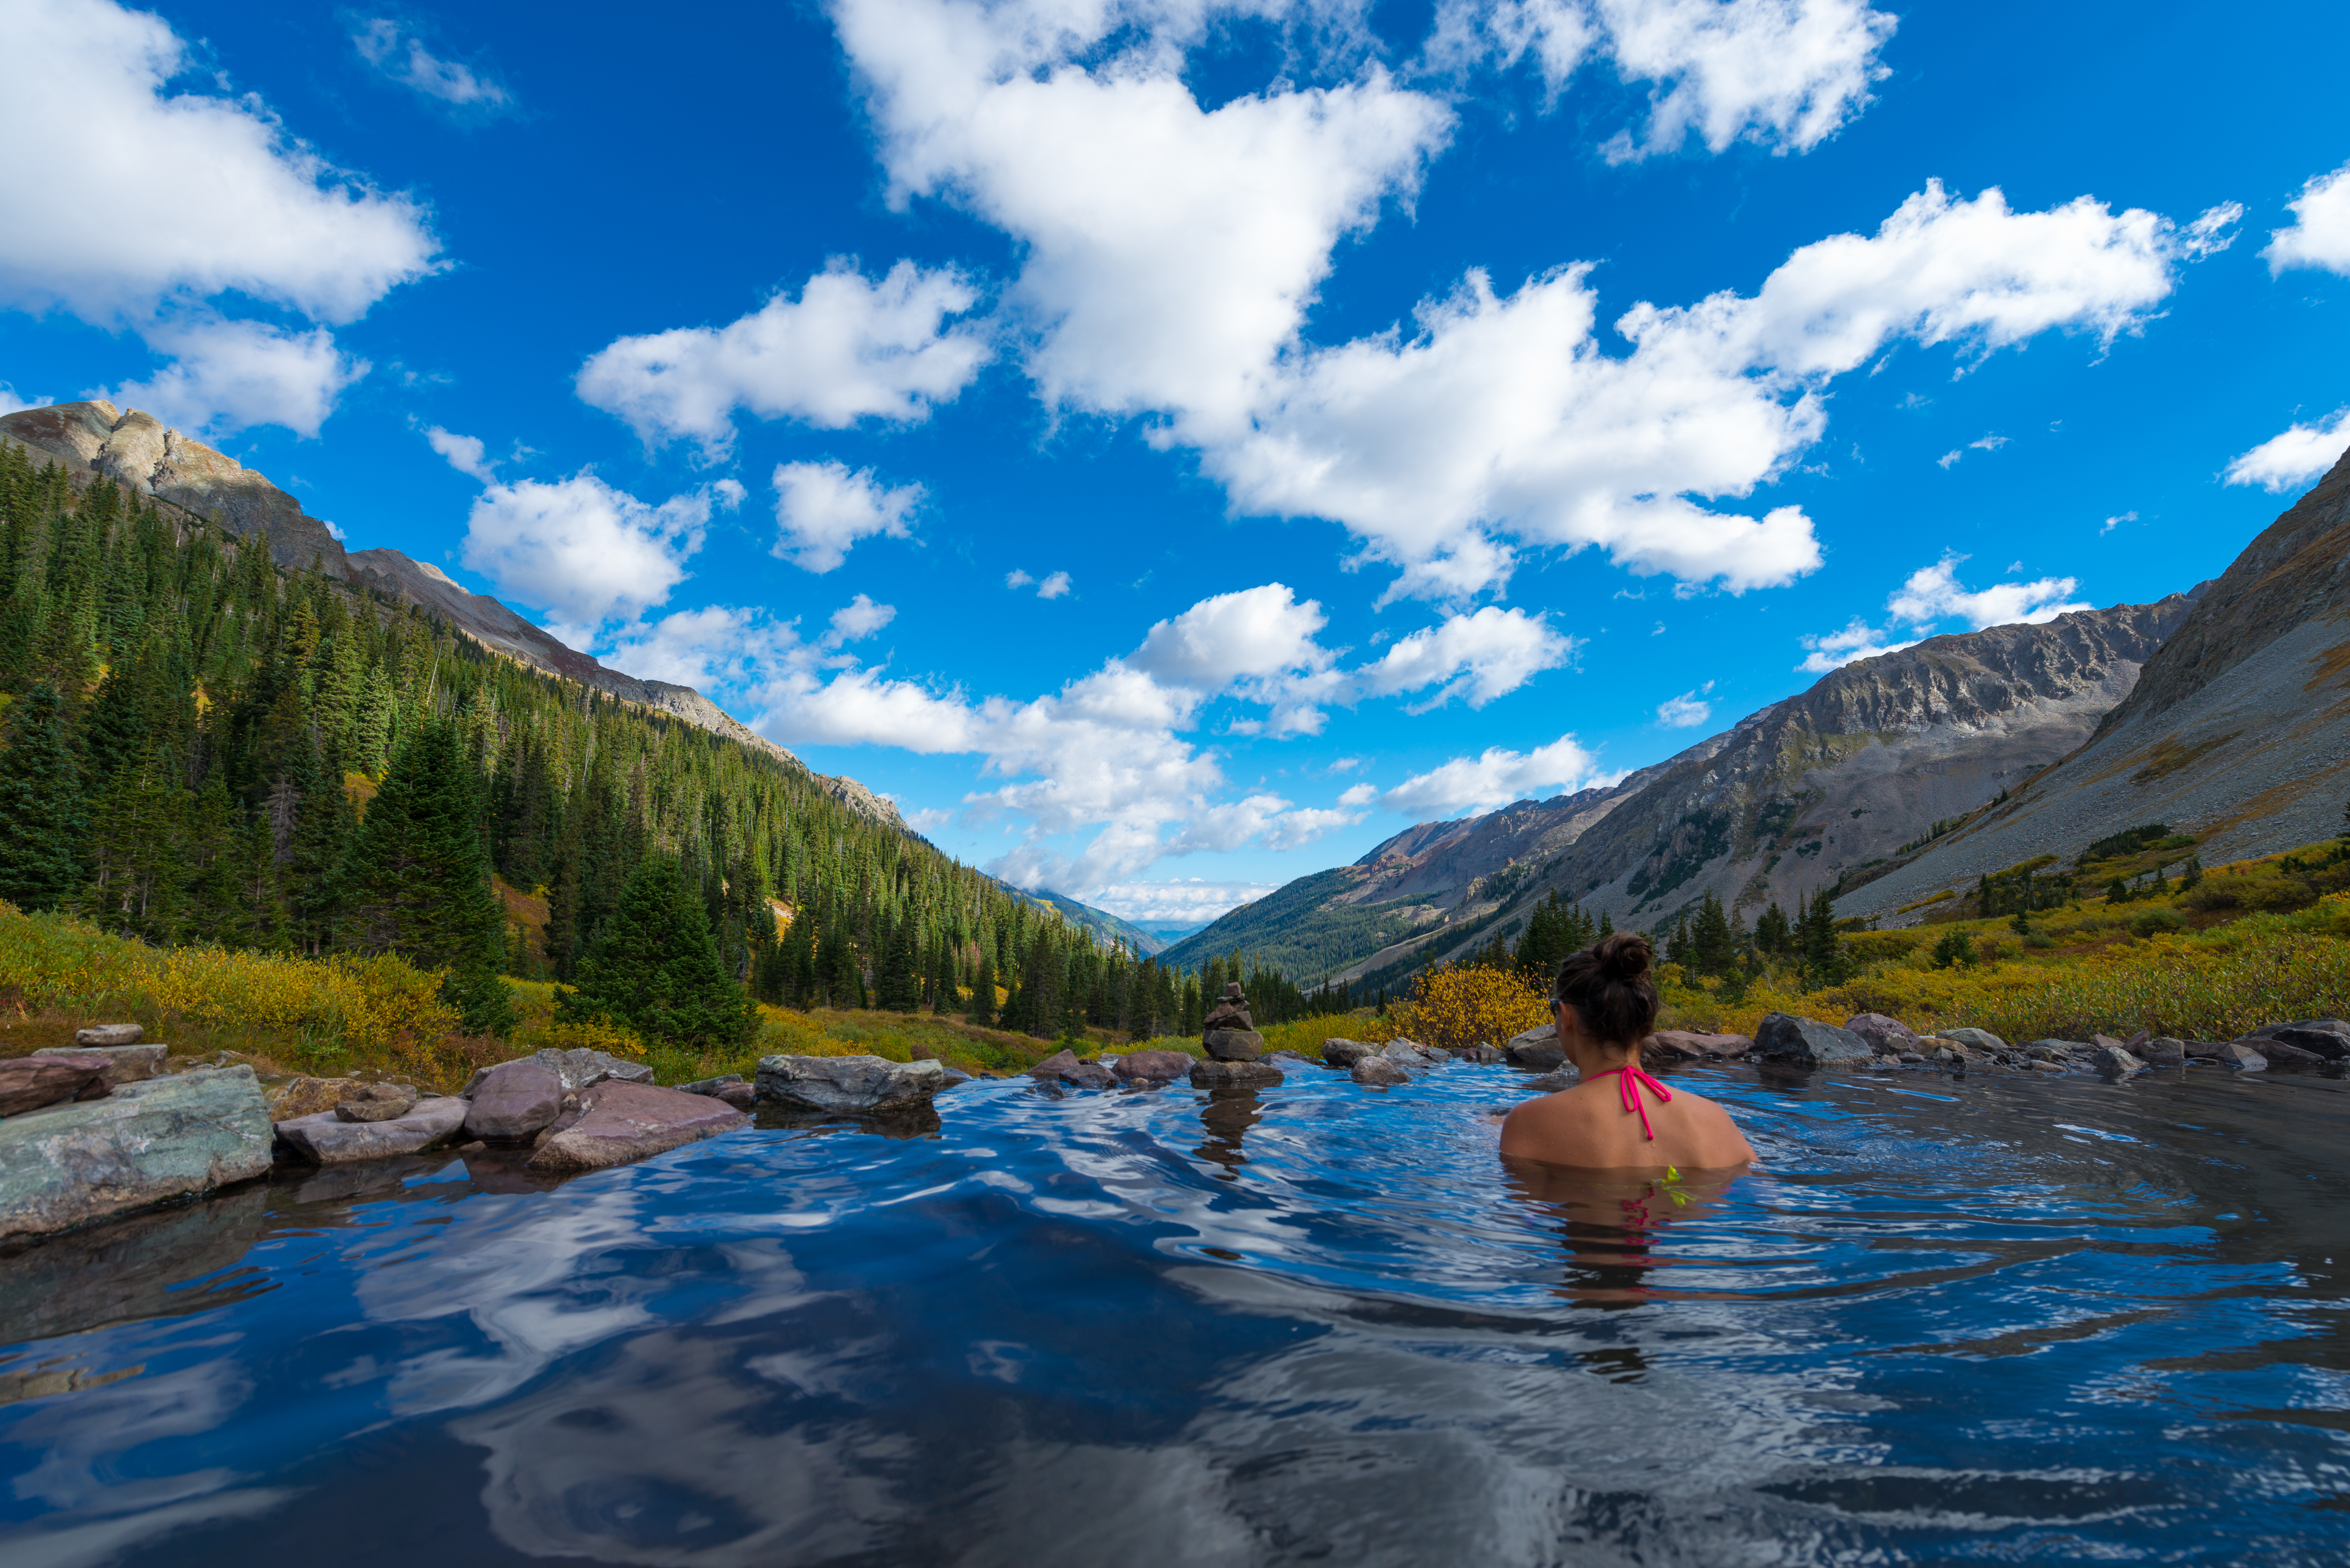 Visit These Hot Springs in Colorado - Conundrum Hot Springs in Colorado